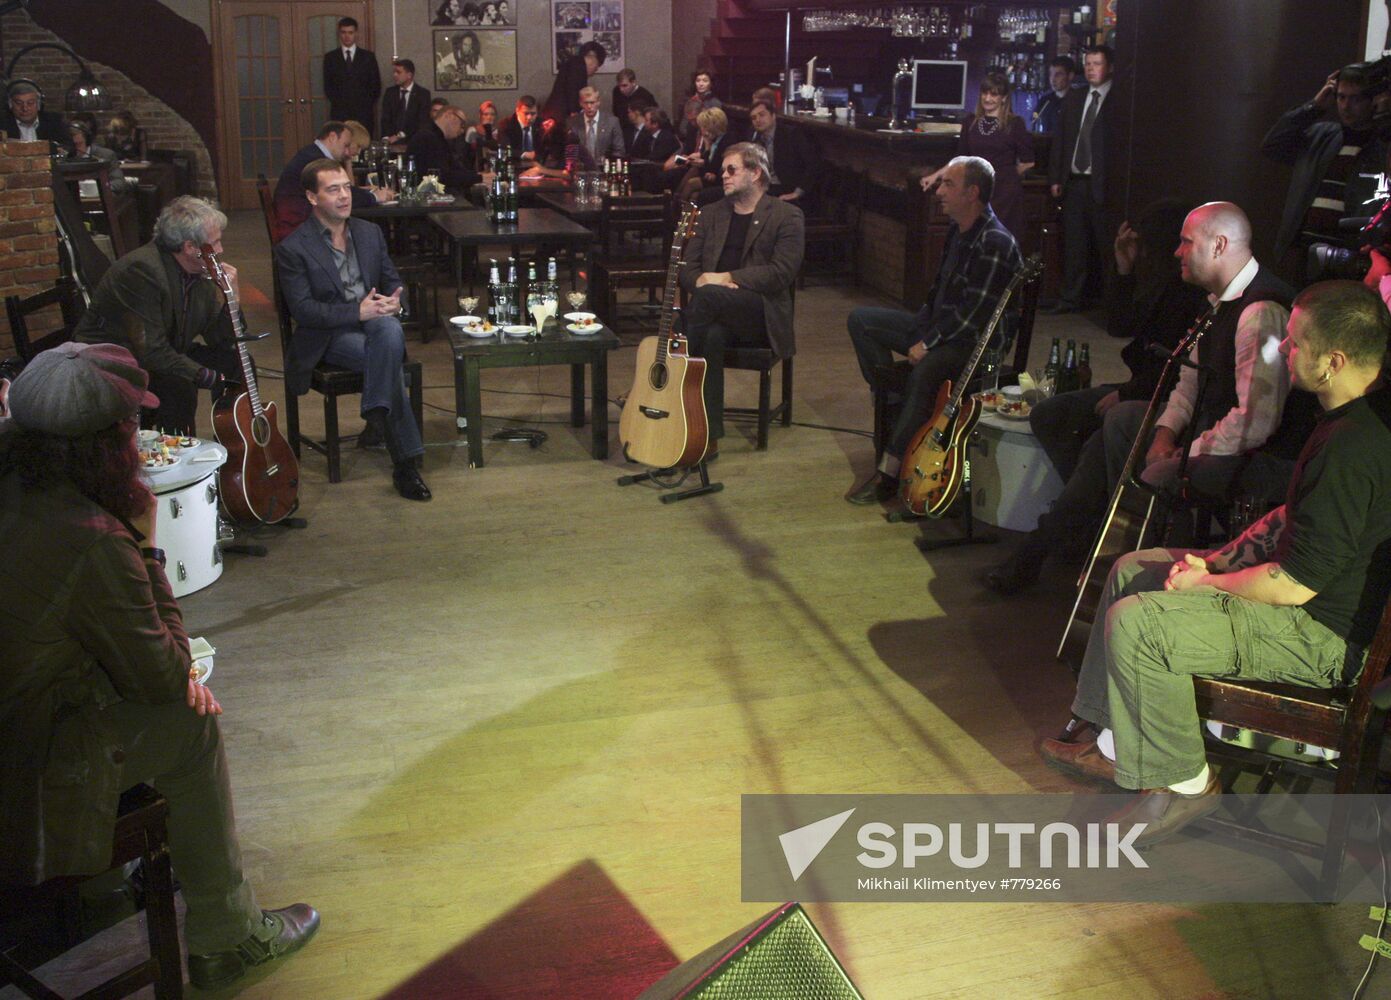 Dmitry Medvedev meets with Russian rock musicians